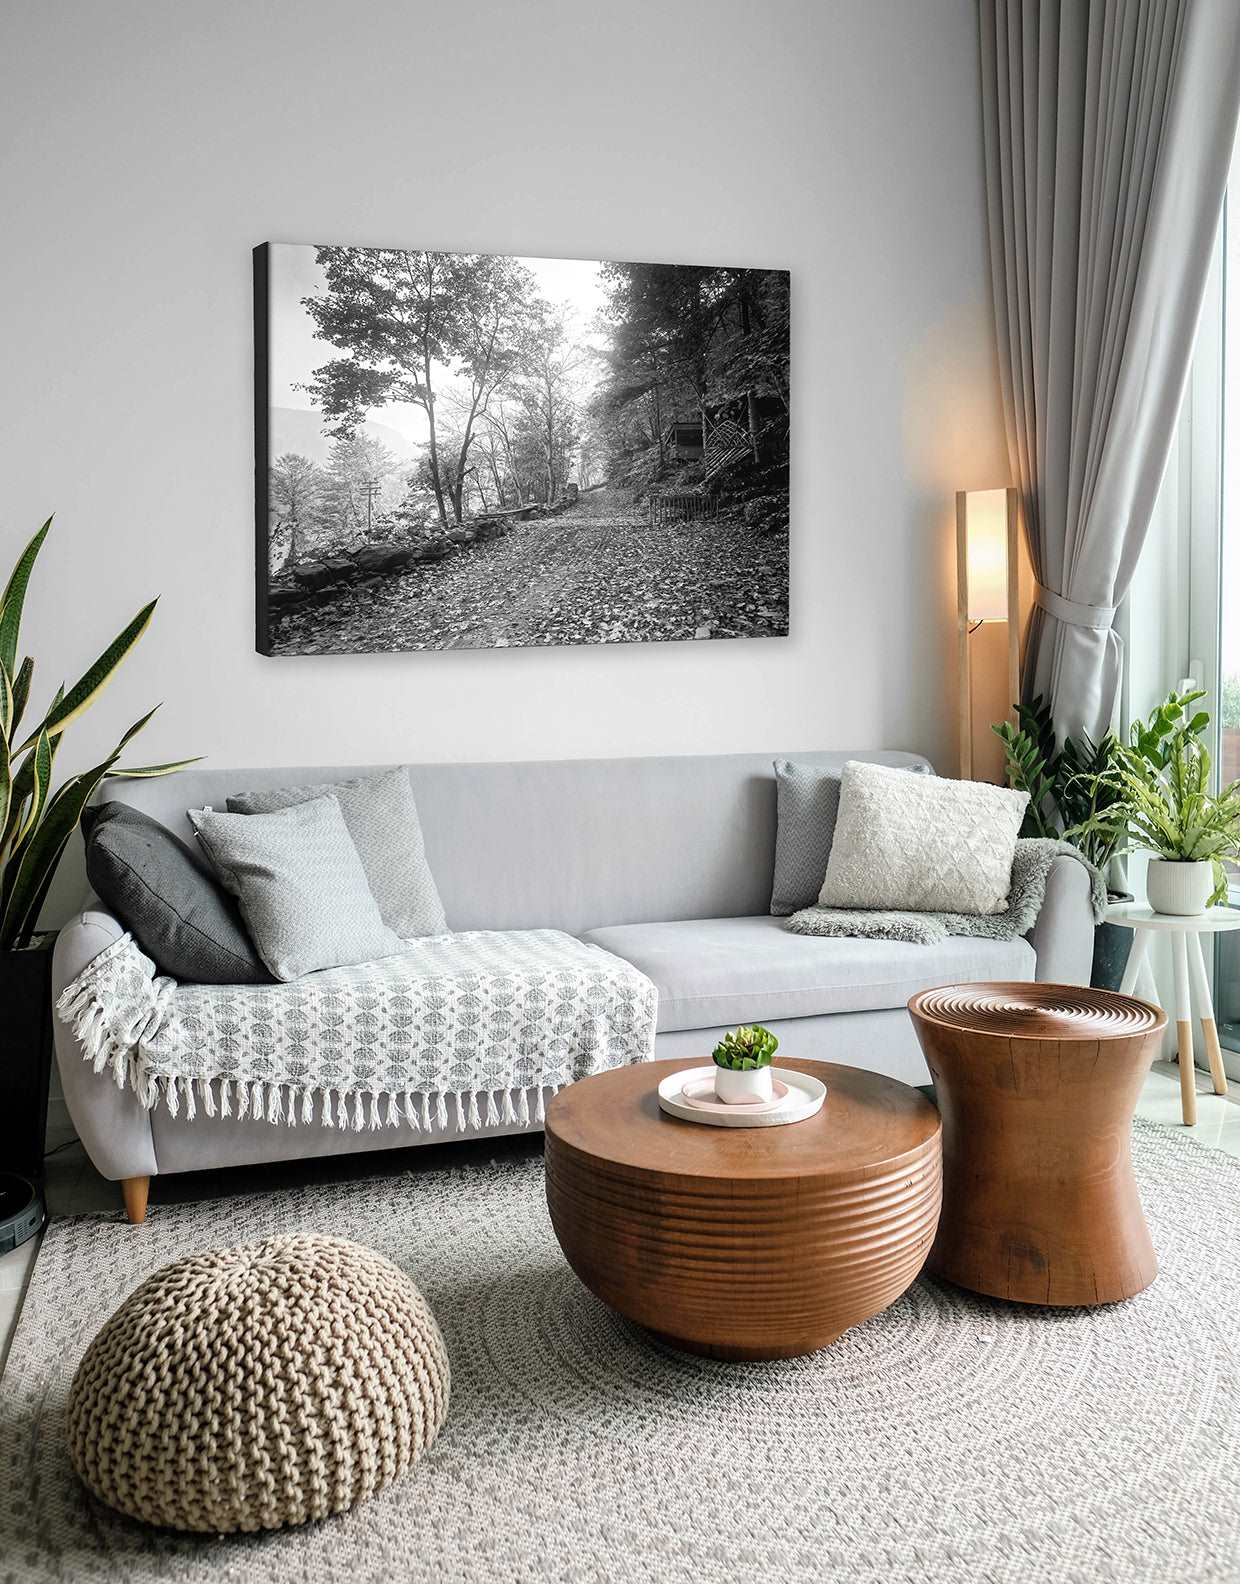 A neutral themed living room with a black and white canvas print of vintage photography on the wall